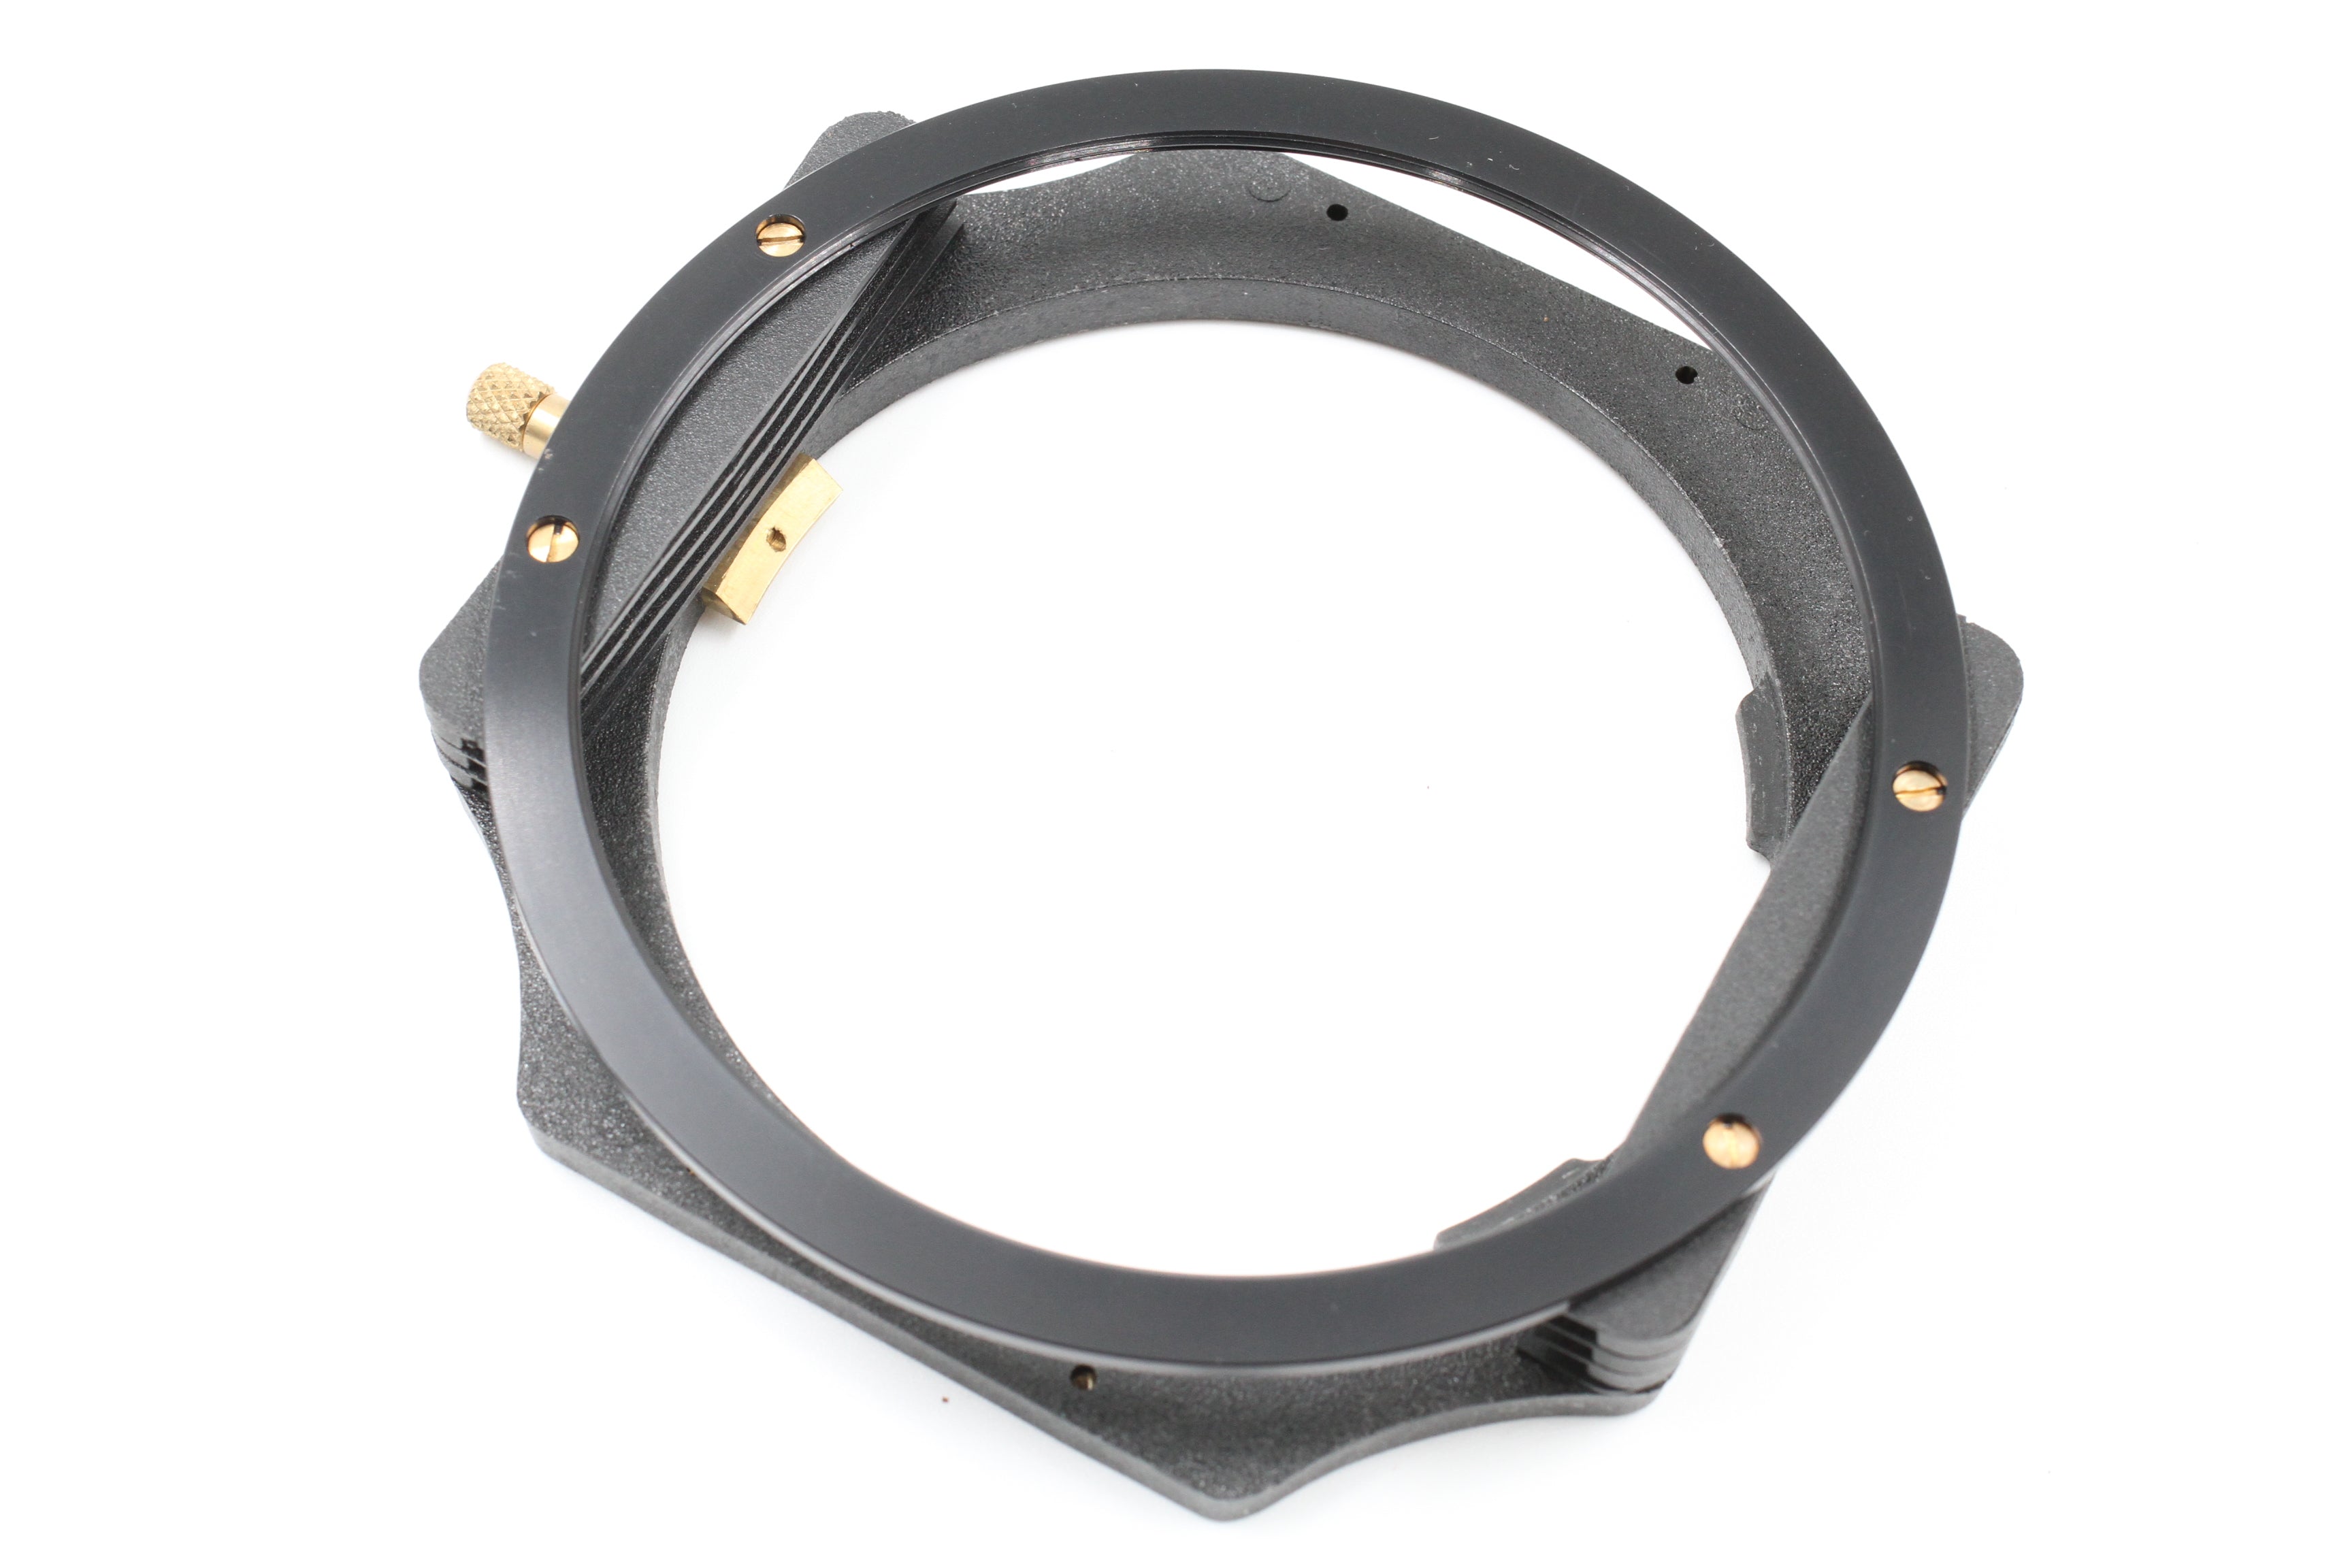 LEE 100 Foundation Filter Holder w/ Pouch & 105mm Ring